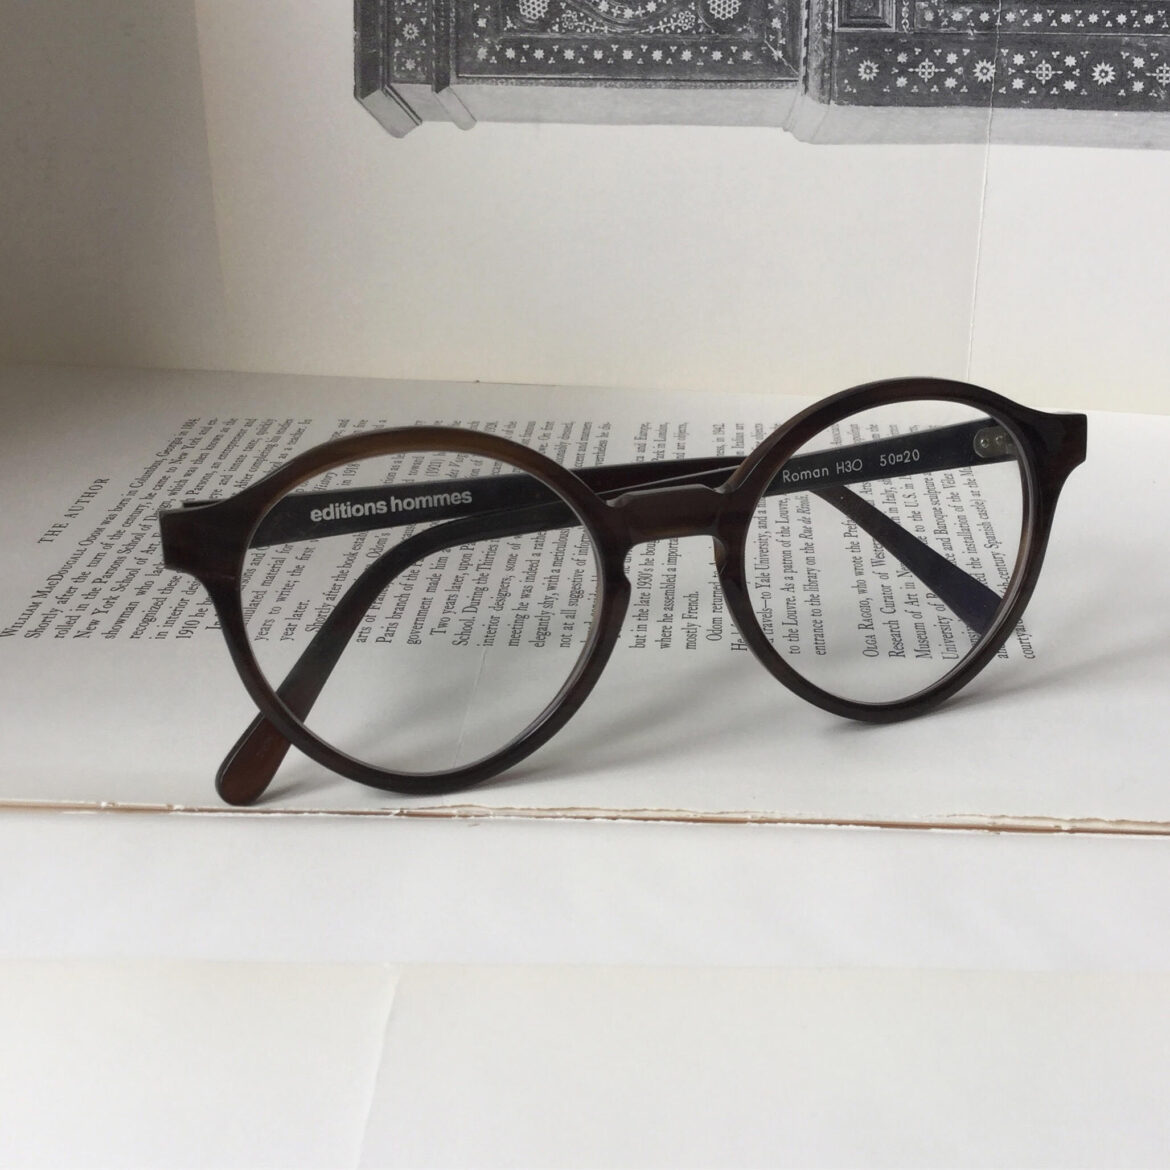 editions hommes horn spectacle frame 'Roman'